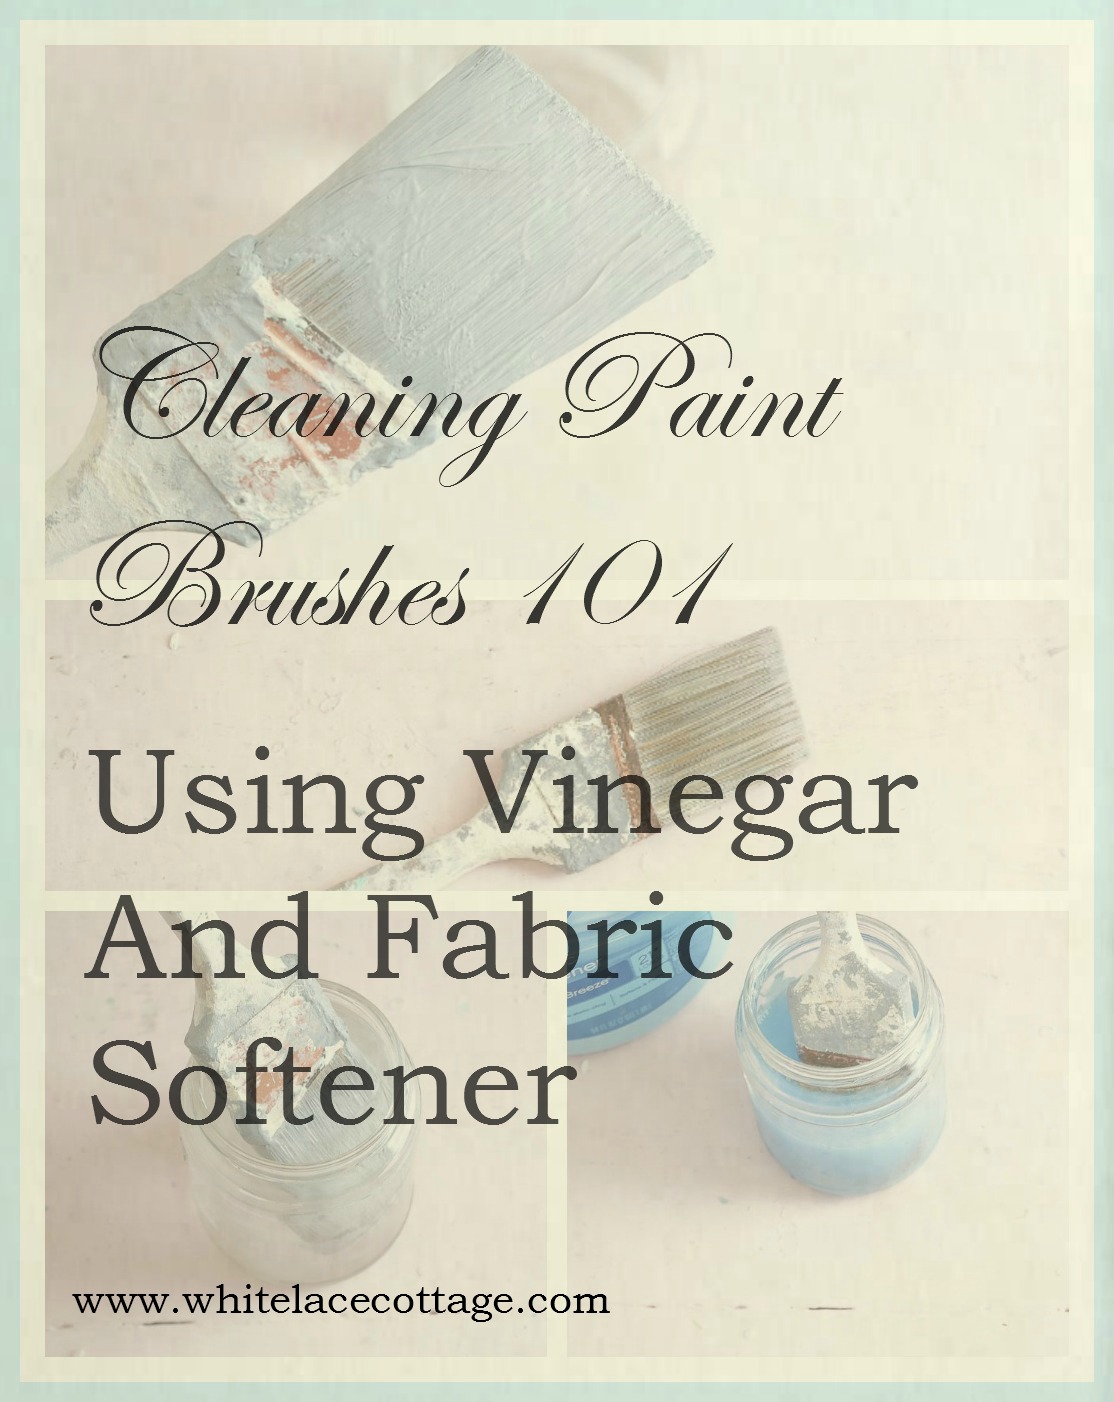  Did you know that vinegar cleans paint brushes? Not only does vinegar clean paint brushes but using fabric softner does too!